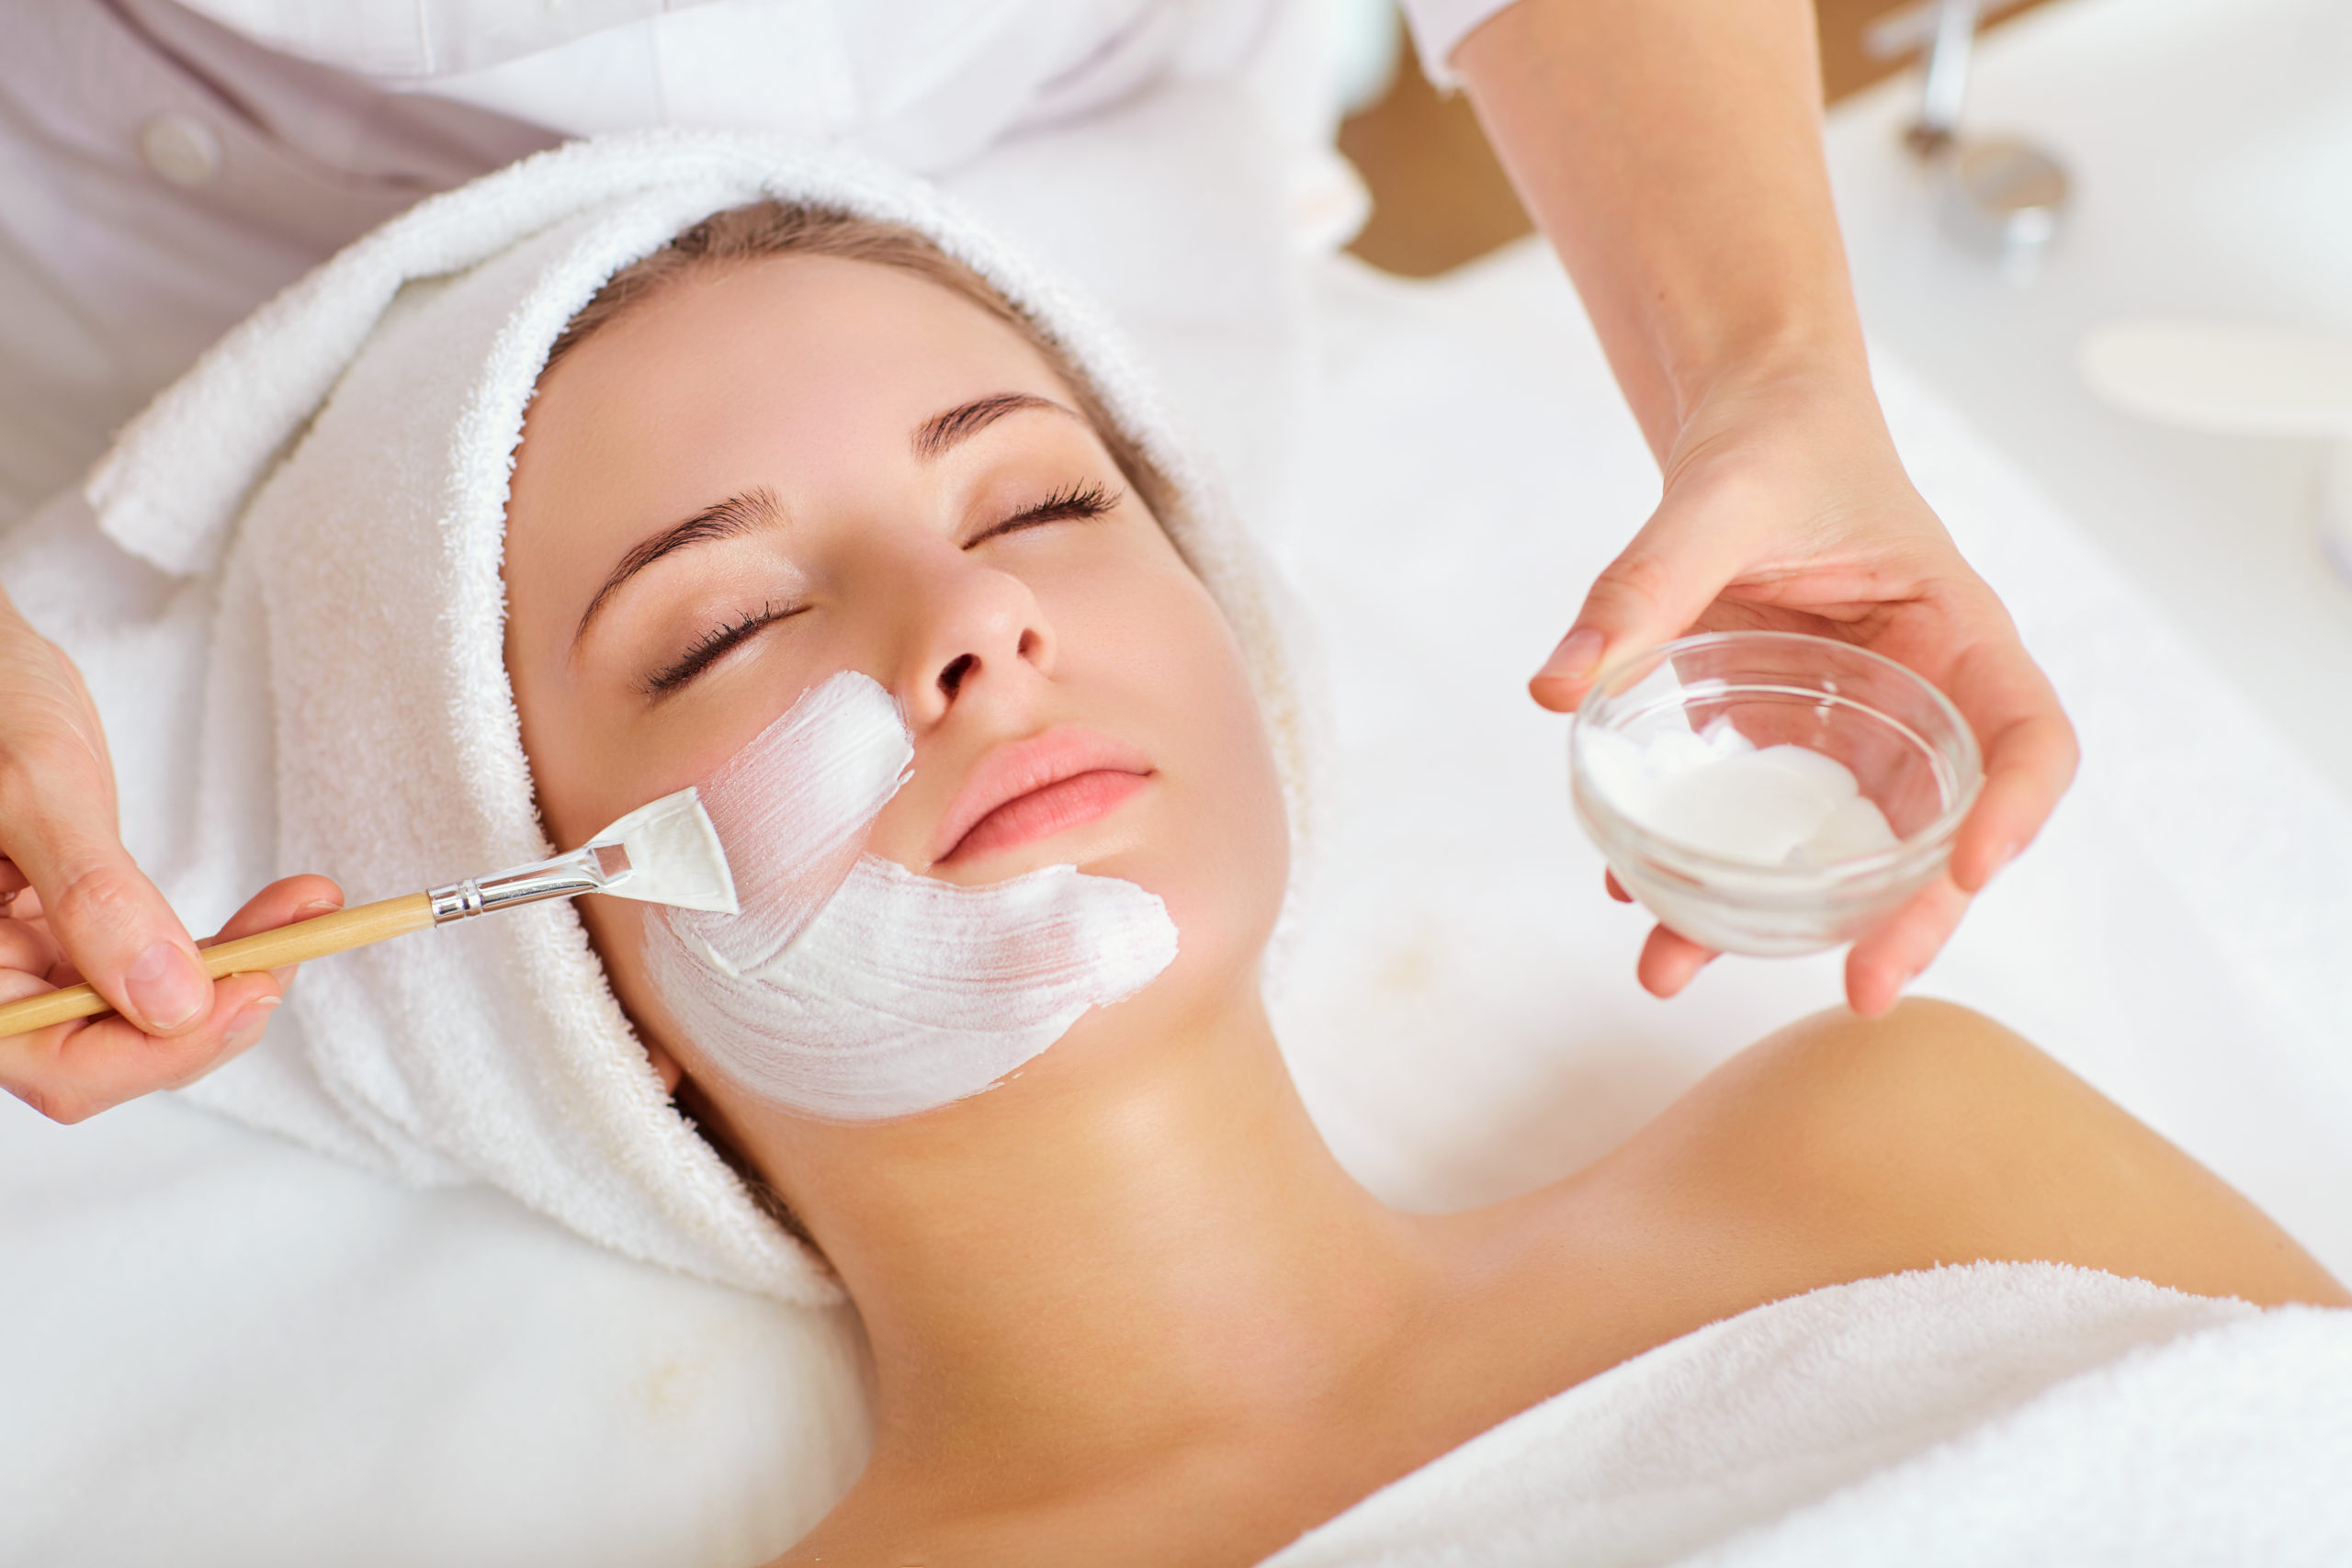 HydroLuxx Facial Rejuvenate and Hydrate Your Skin with Advanced Skincare Technology